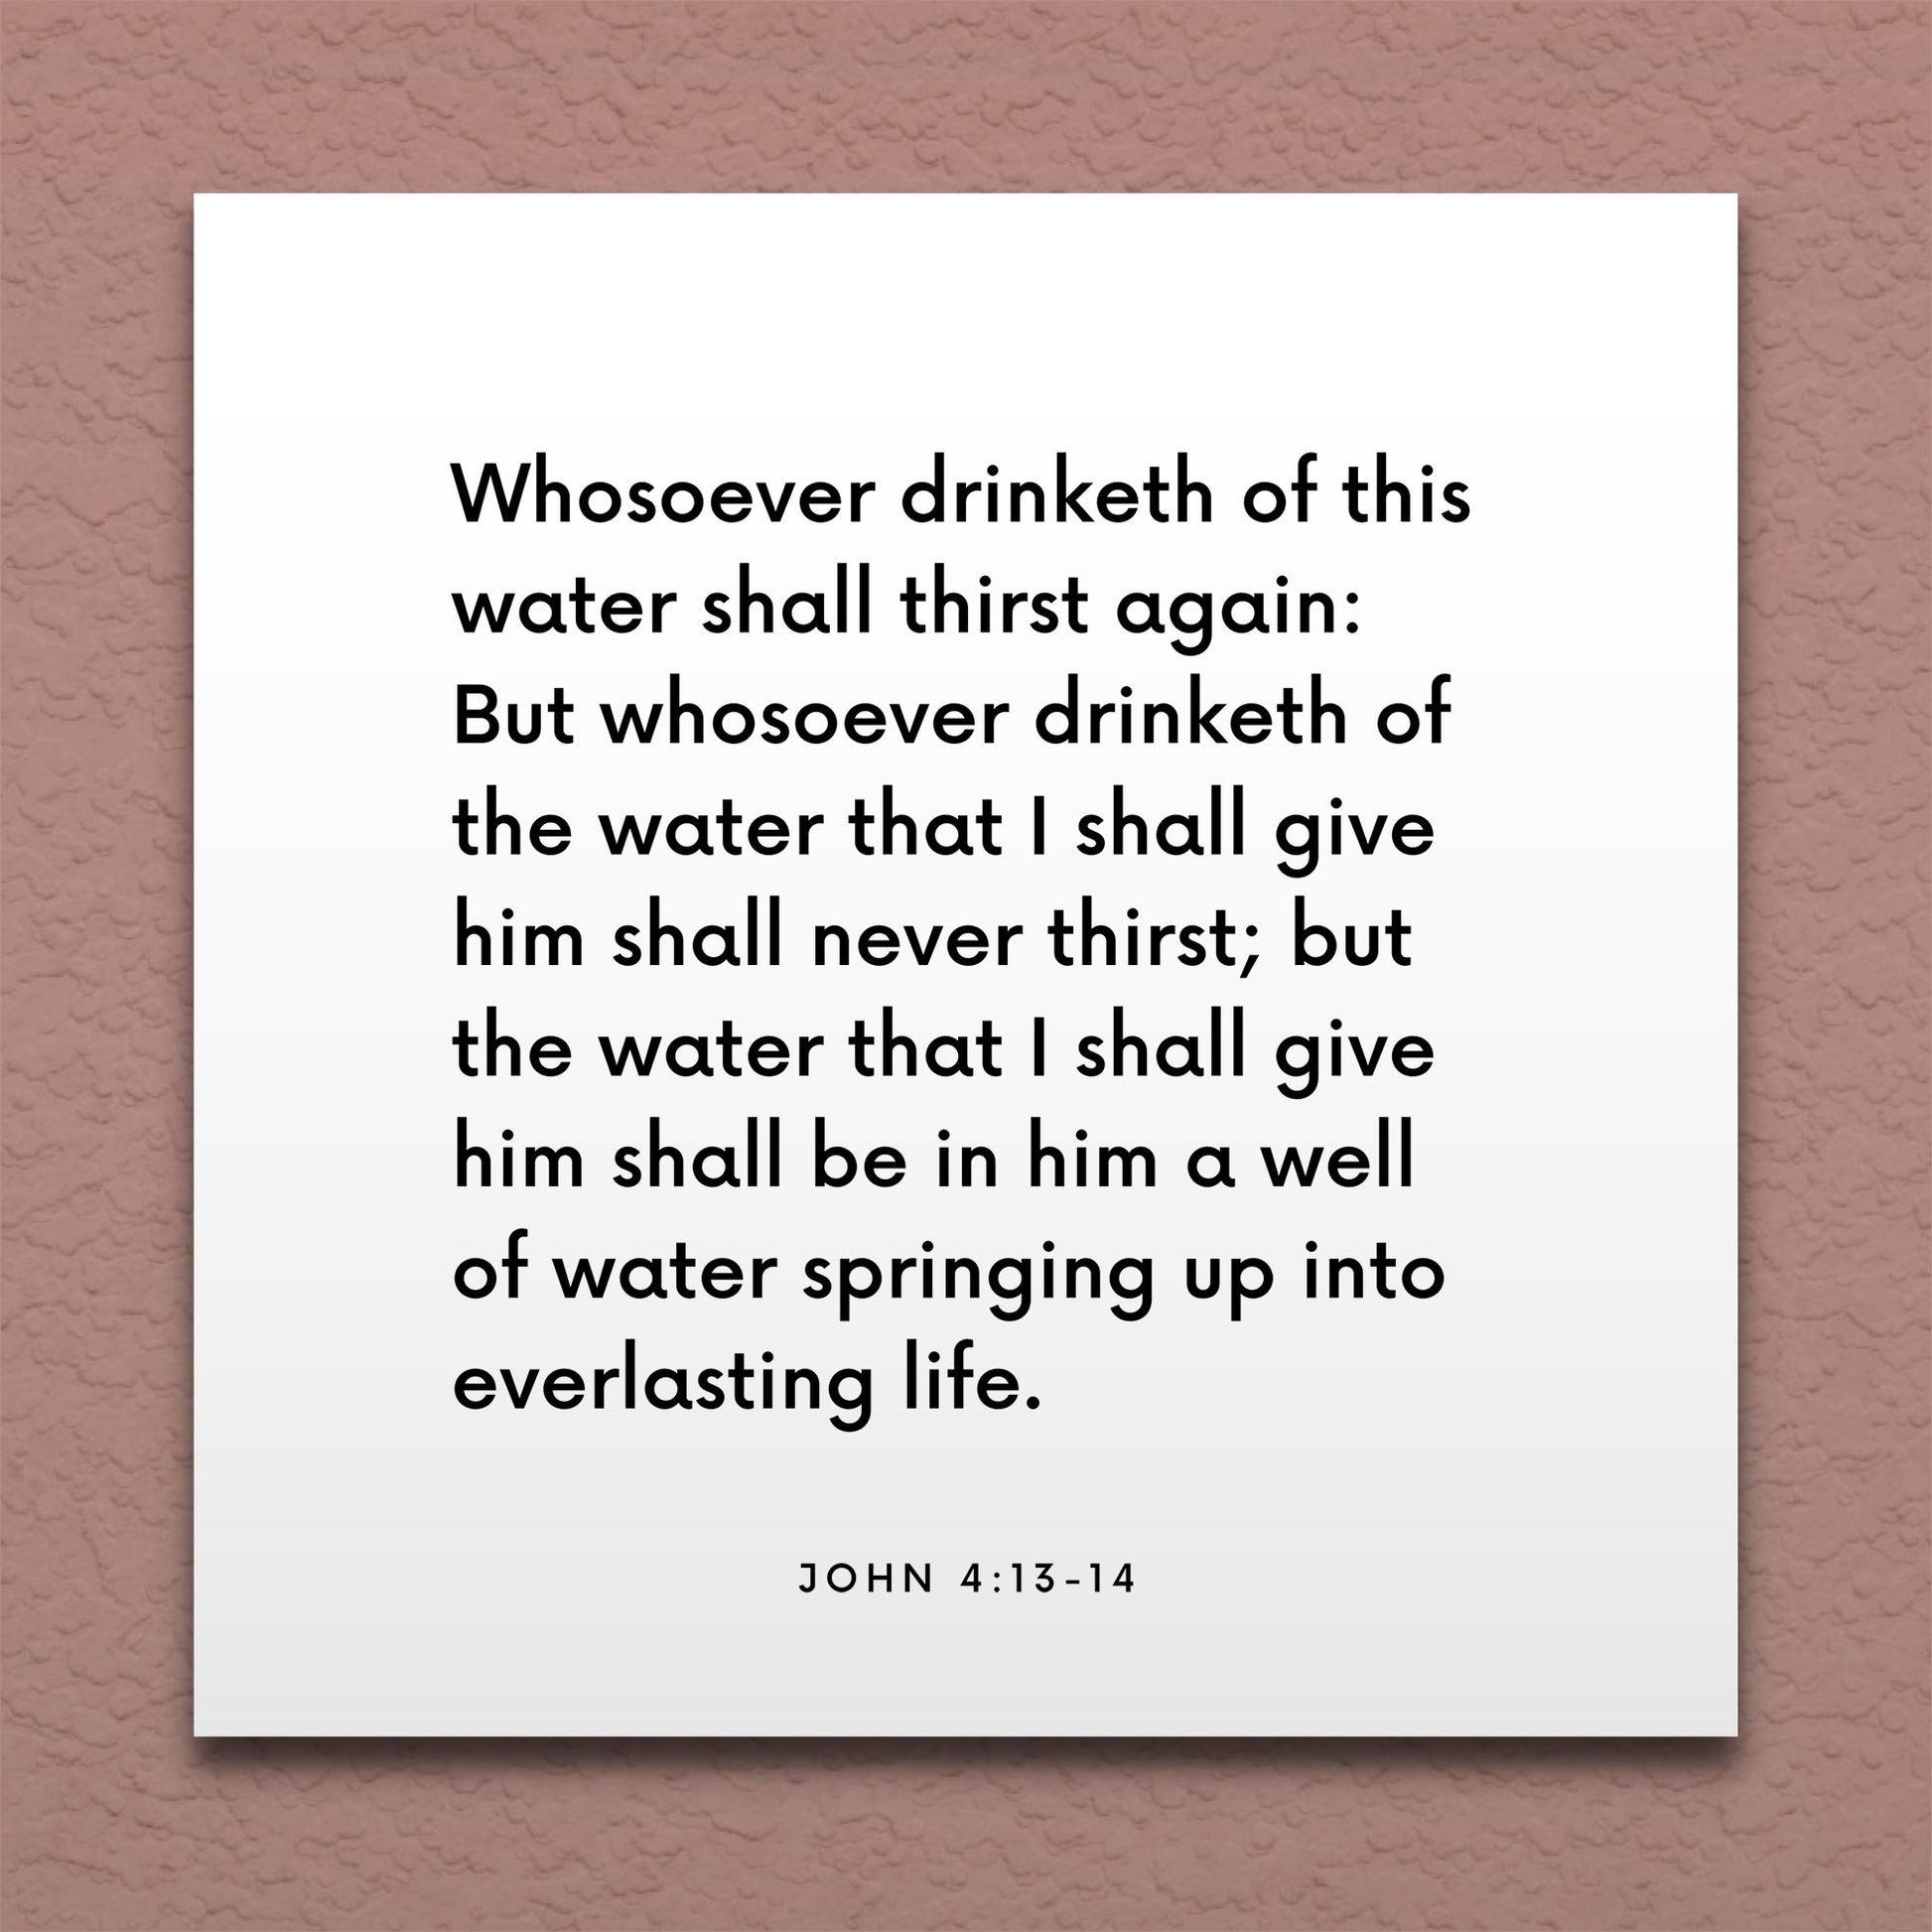 Wall-mounted scripture tile for John 4:13-14 - "Whosoever drinketh of this water shall thirst again"